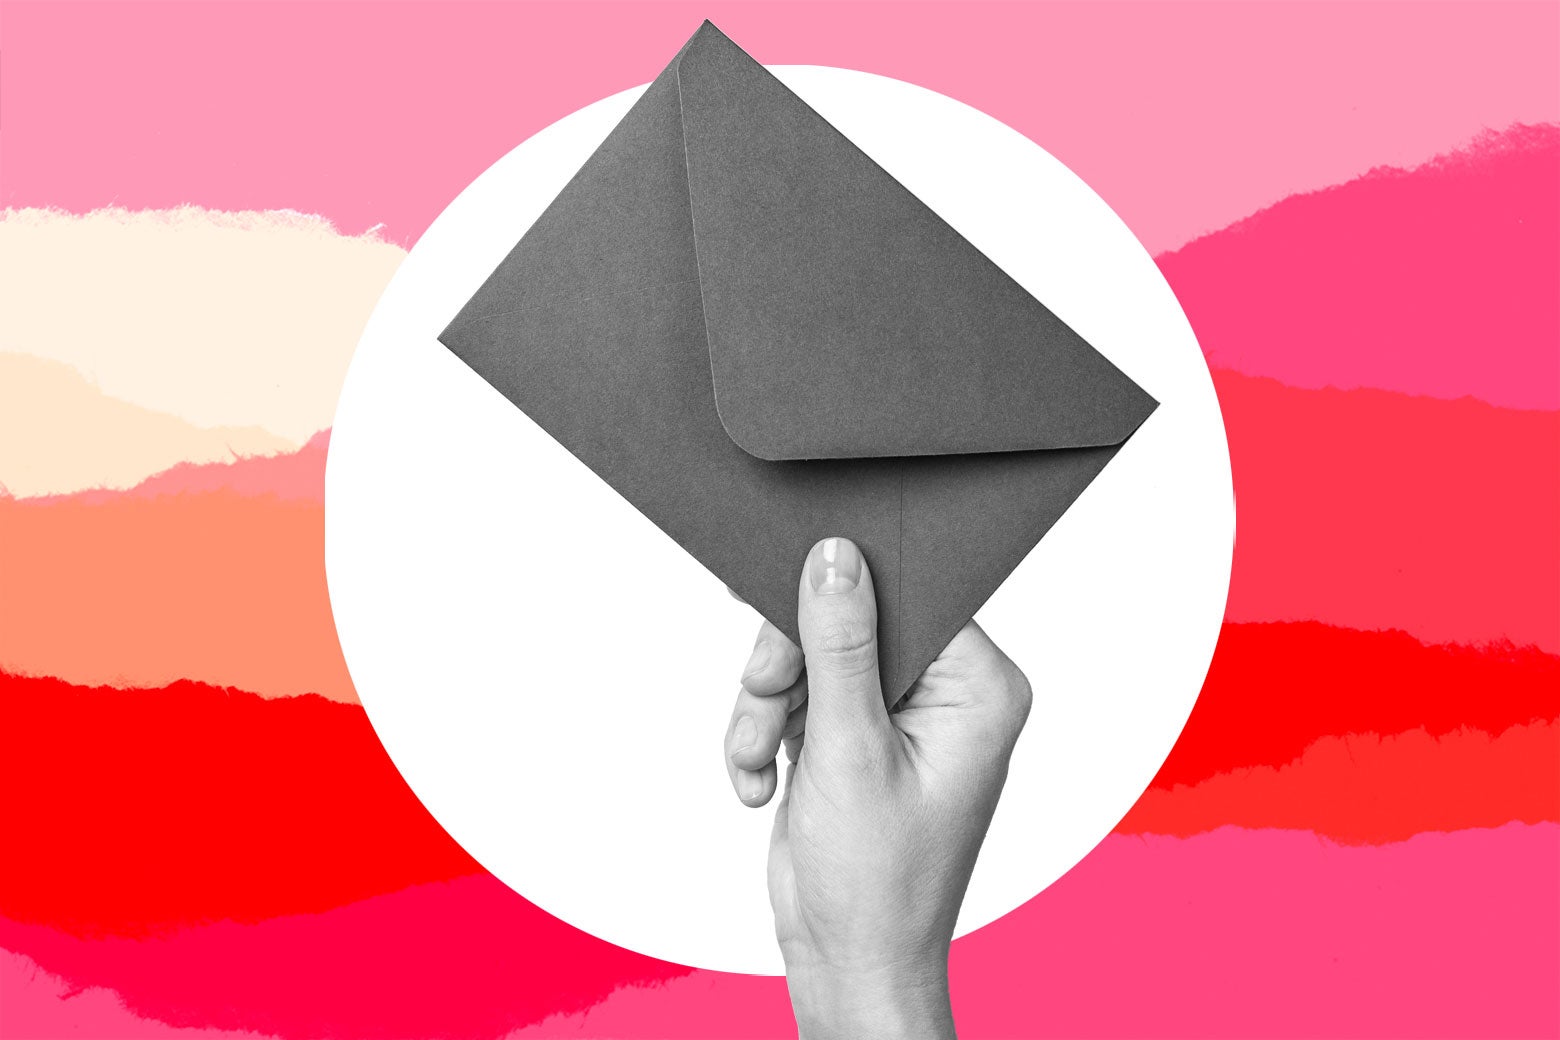 A hand holding an envelope.